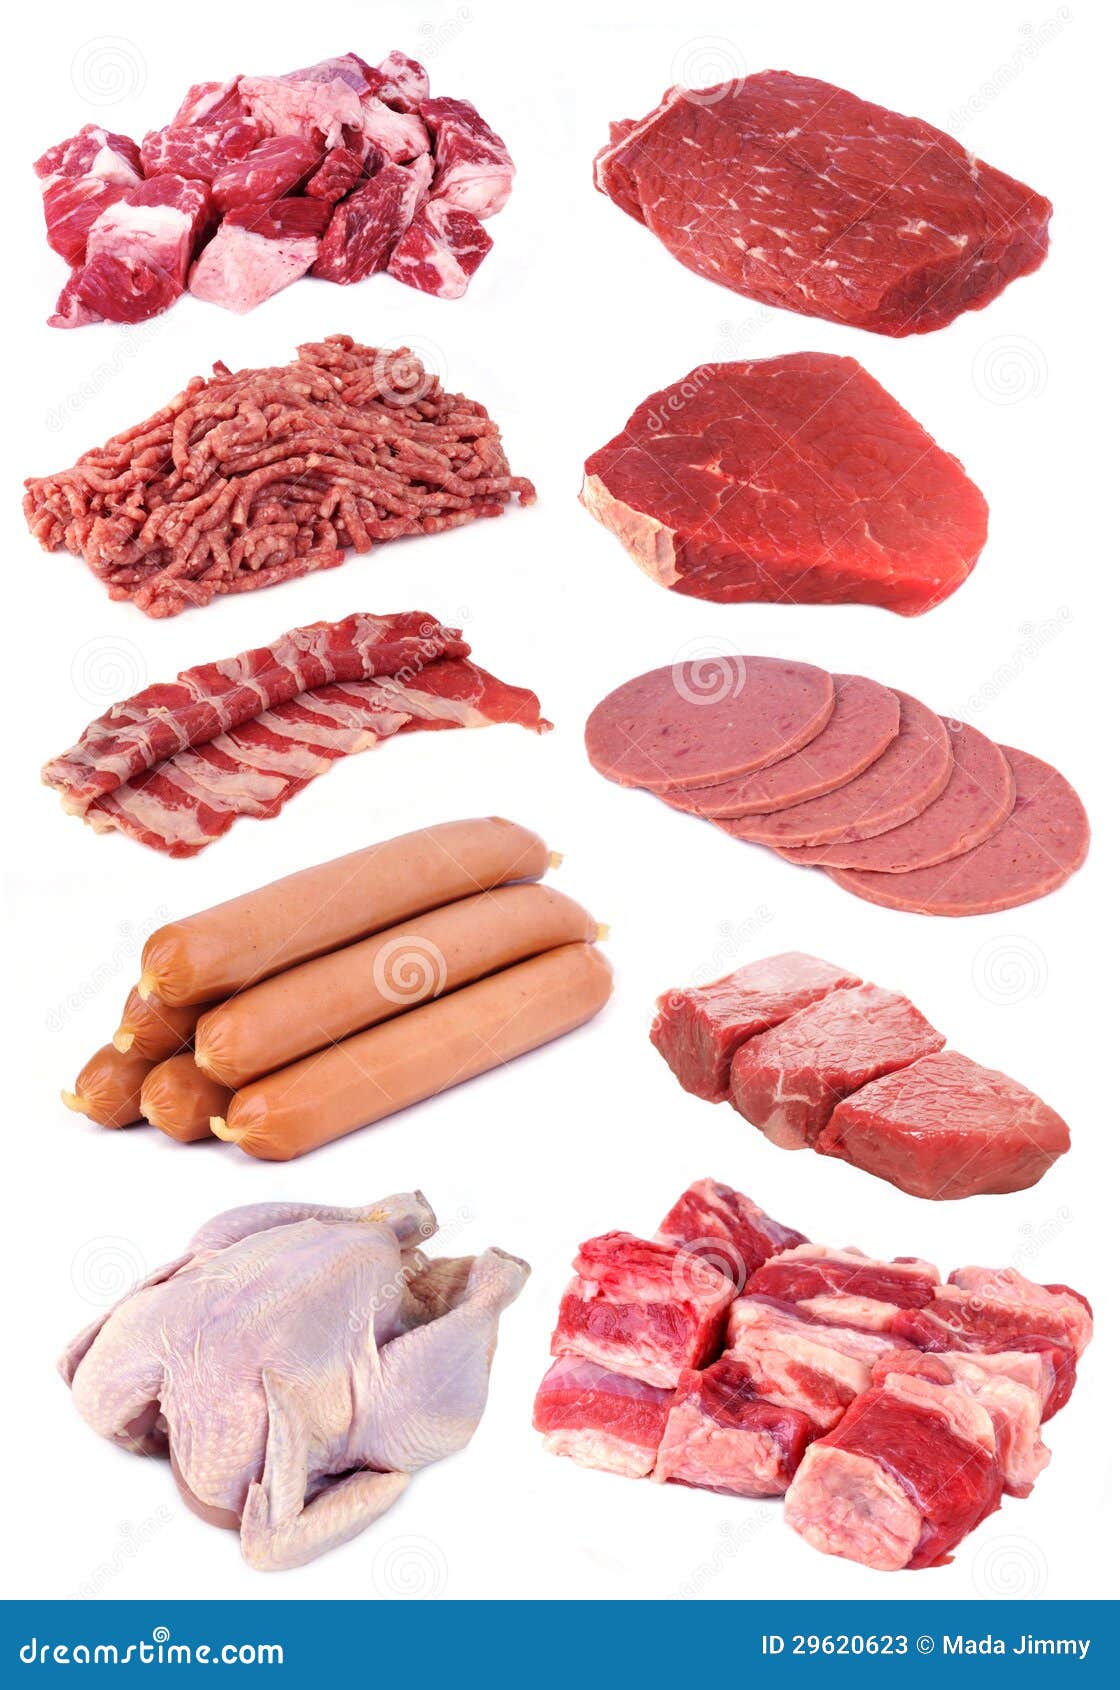 meat collection